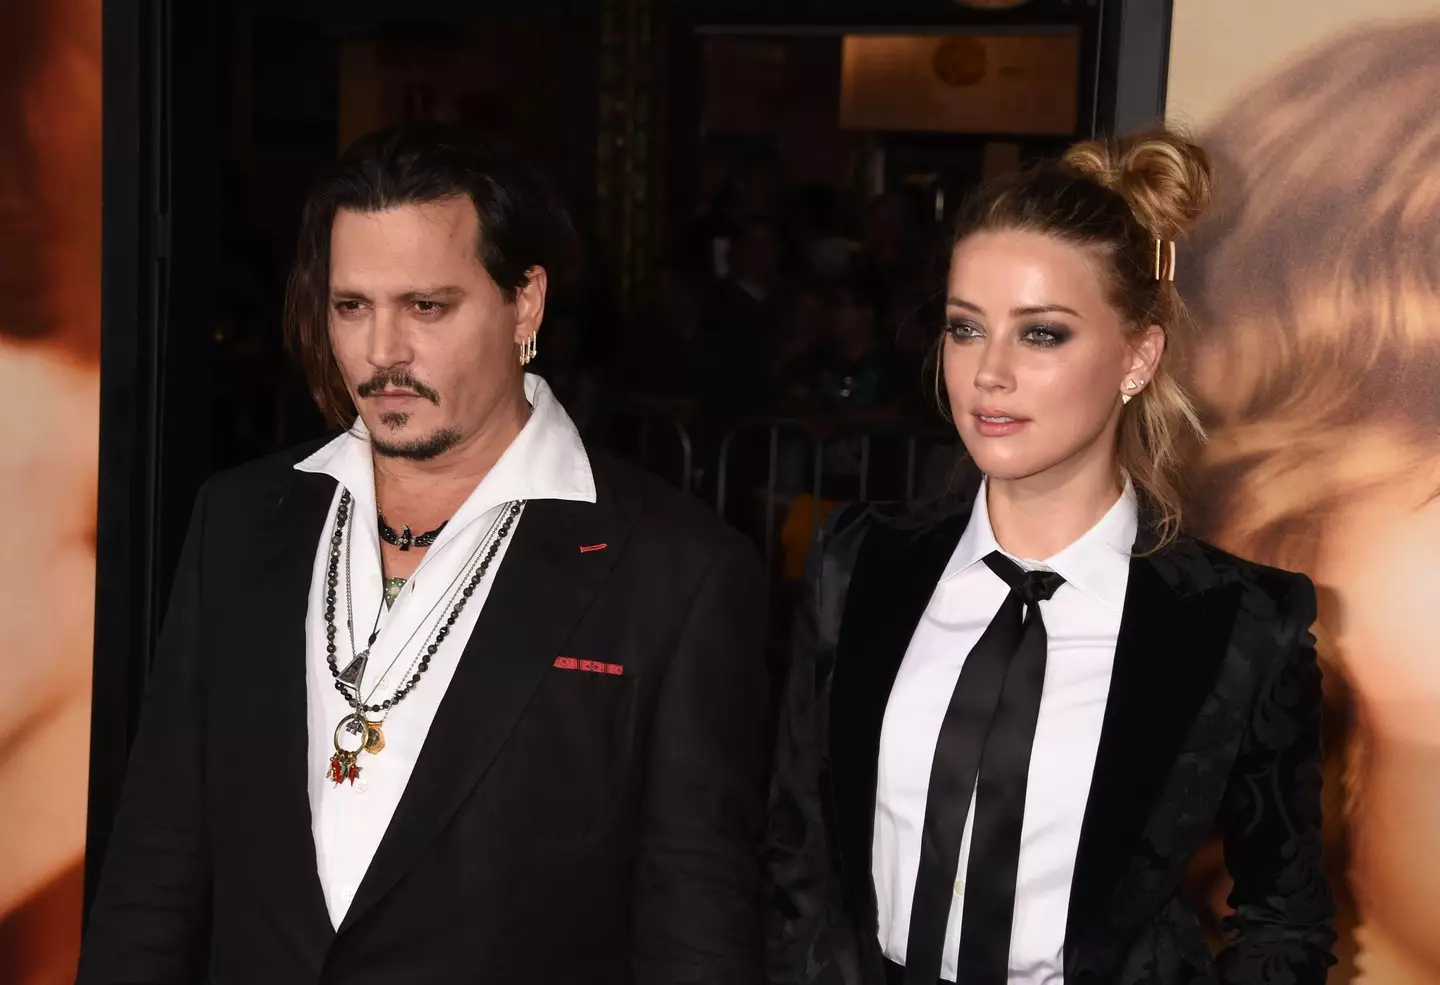 Actor Johnny Depp and wife/actress Amber Heard arrive at the premiere of Focus Features' "The Danish Girl" at Westwood Village Theatre on November 21, 2015 in Westwood, California.